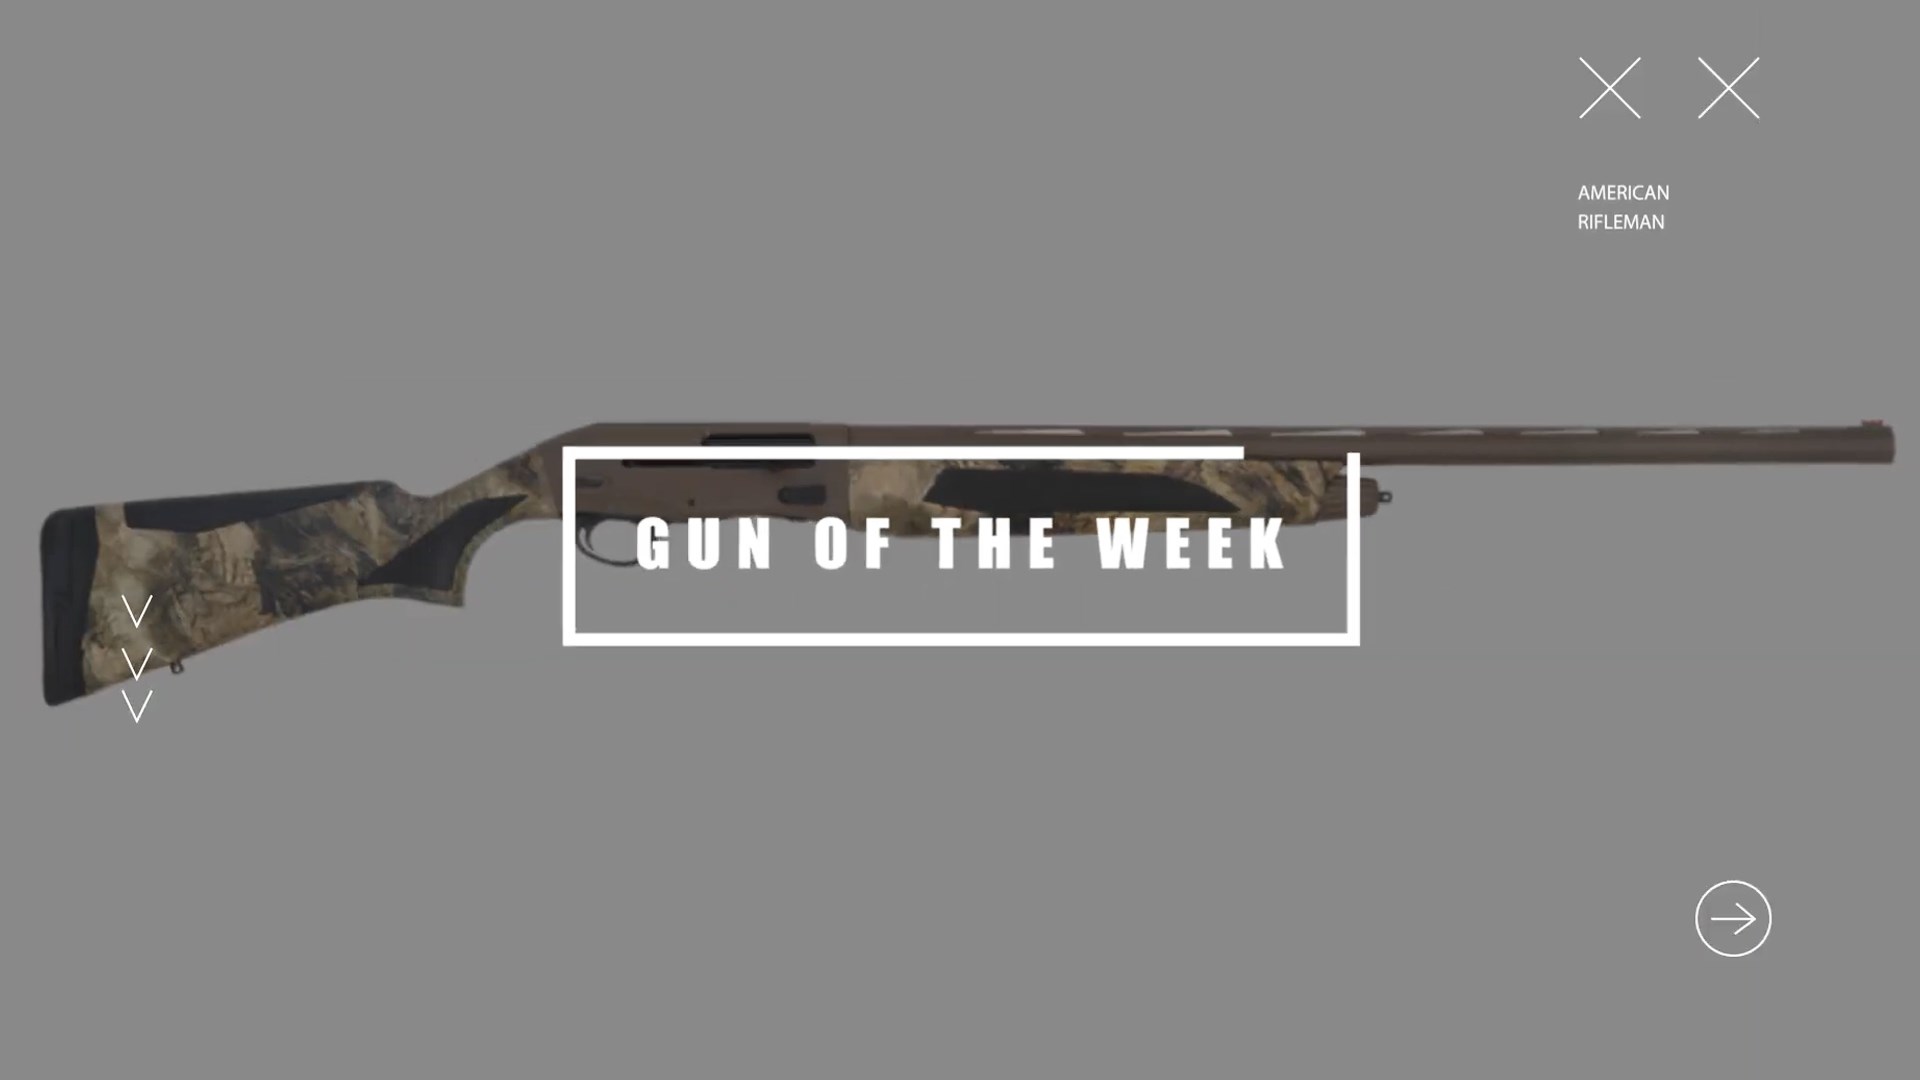 GUN OF THE WEEK AMERICAN RIFLEMAN XX text on image overlay box right-side view tristar viper g2 pro semi-automatic shotgun FDE color